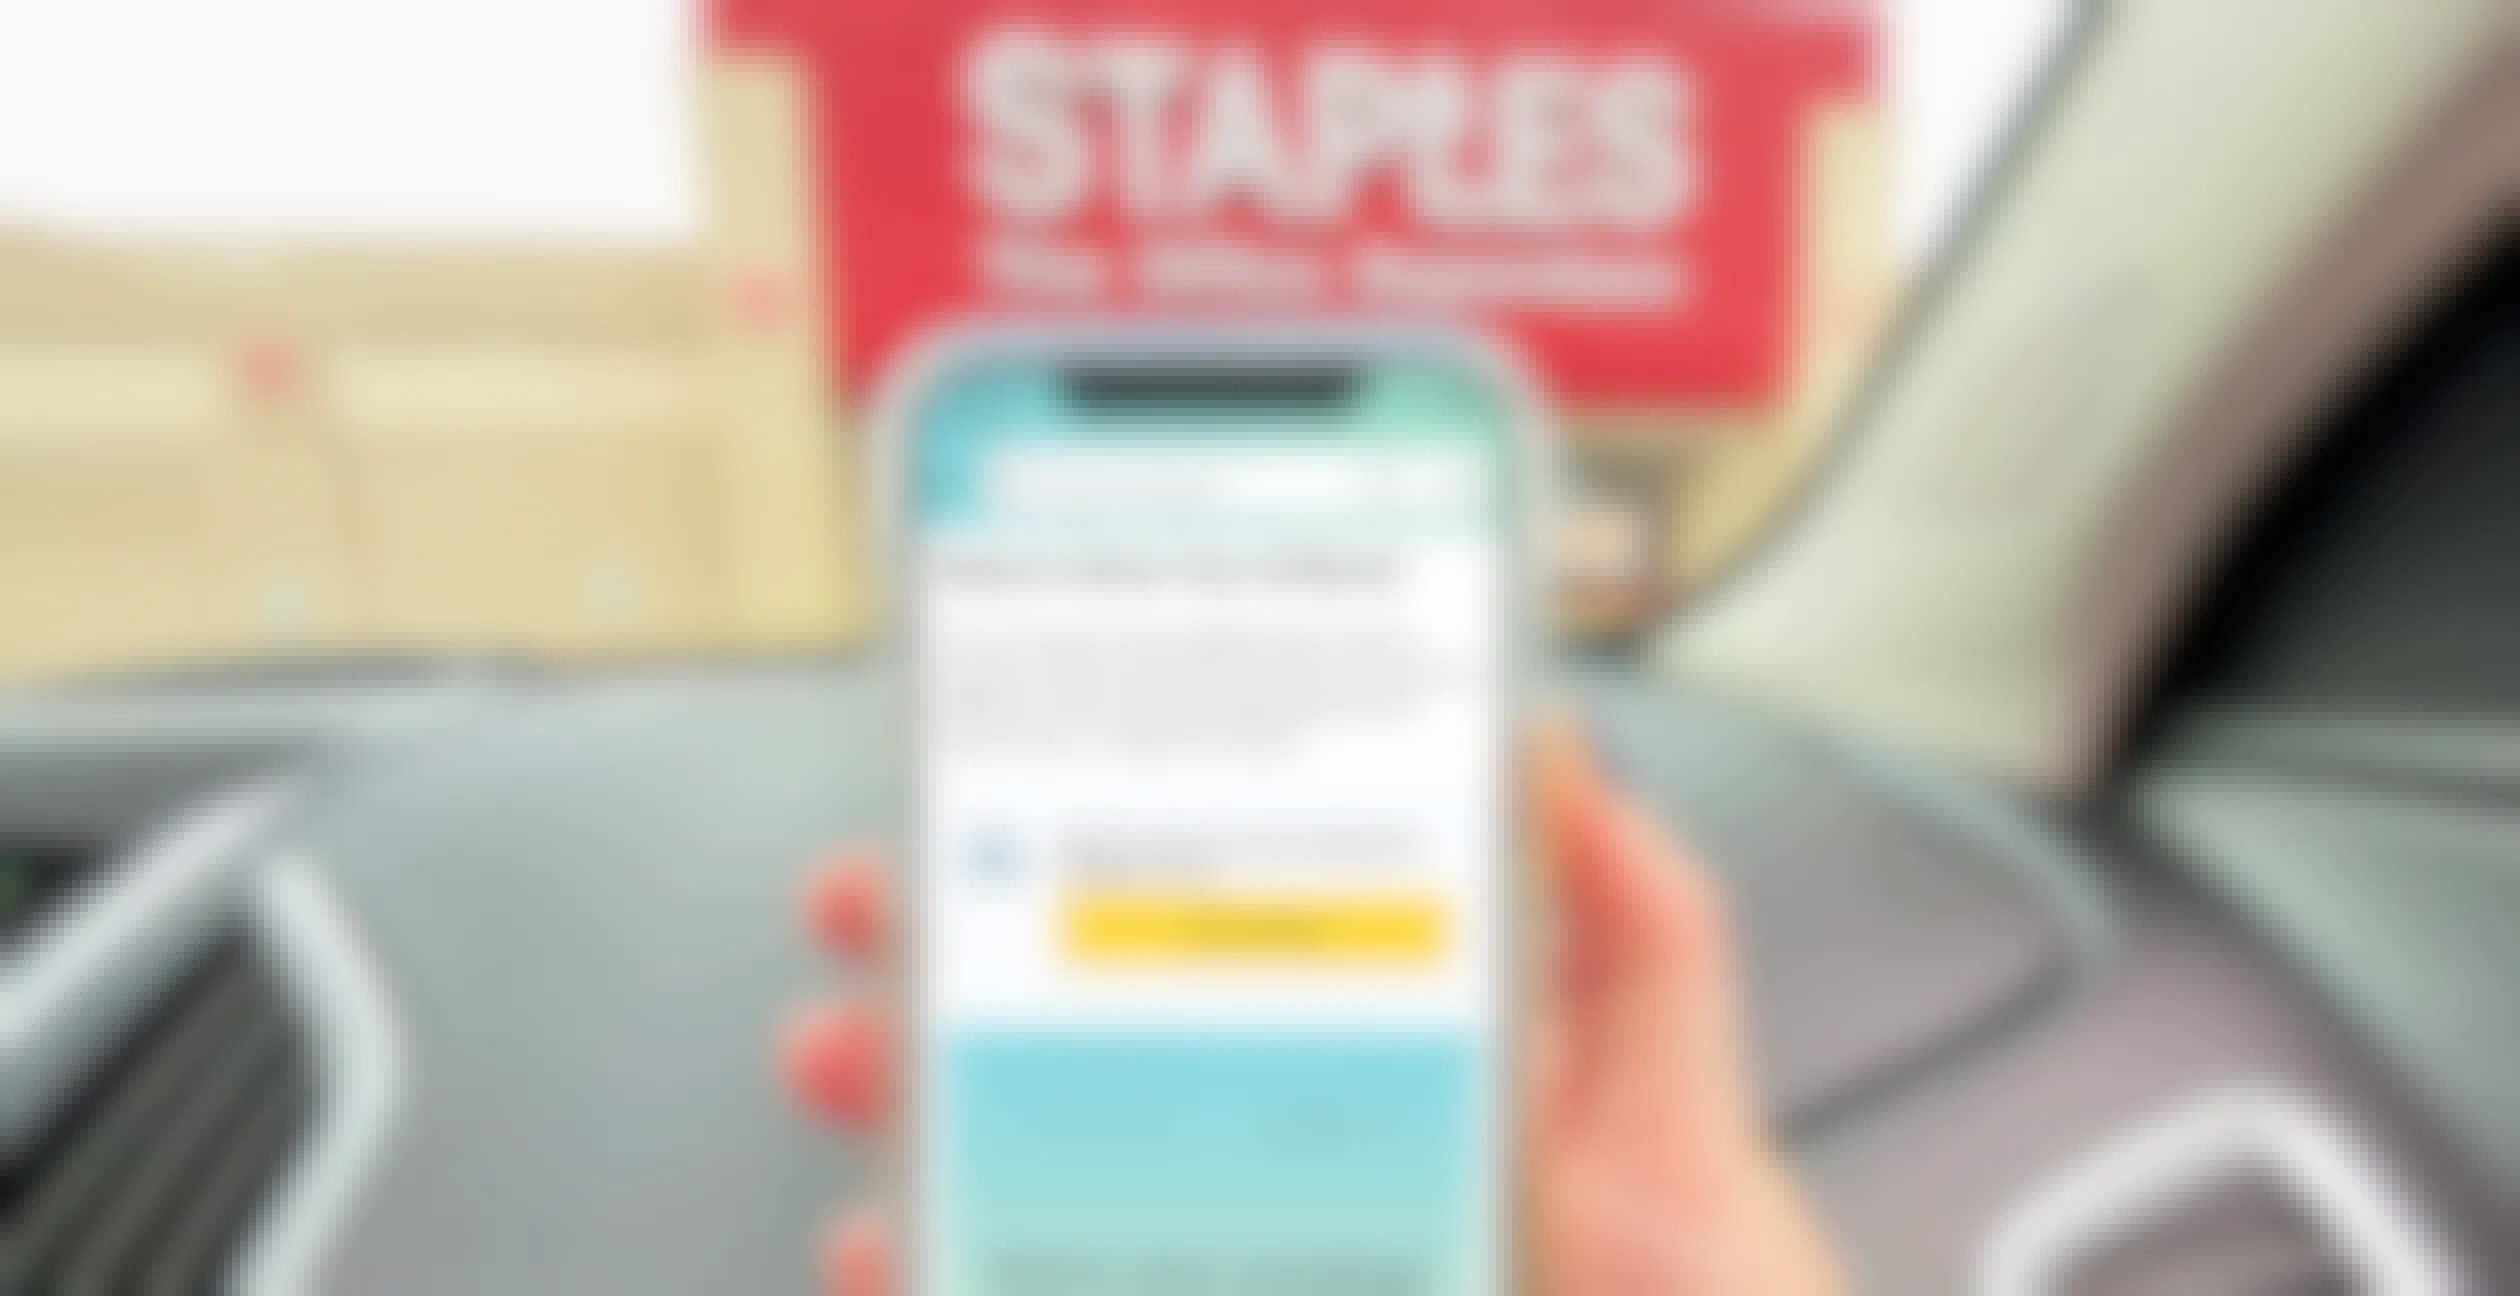 Amazon Returns at Staples: Here's What They're Testing